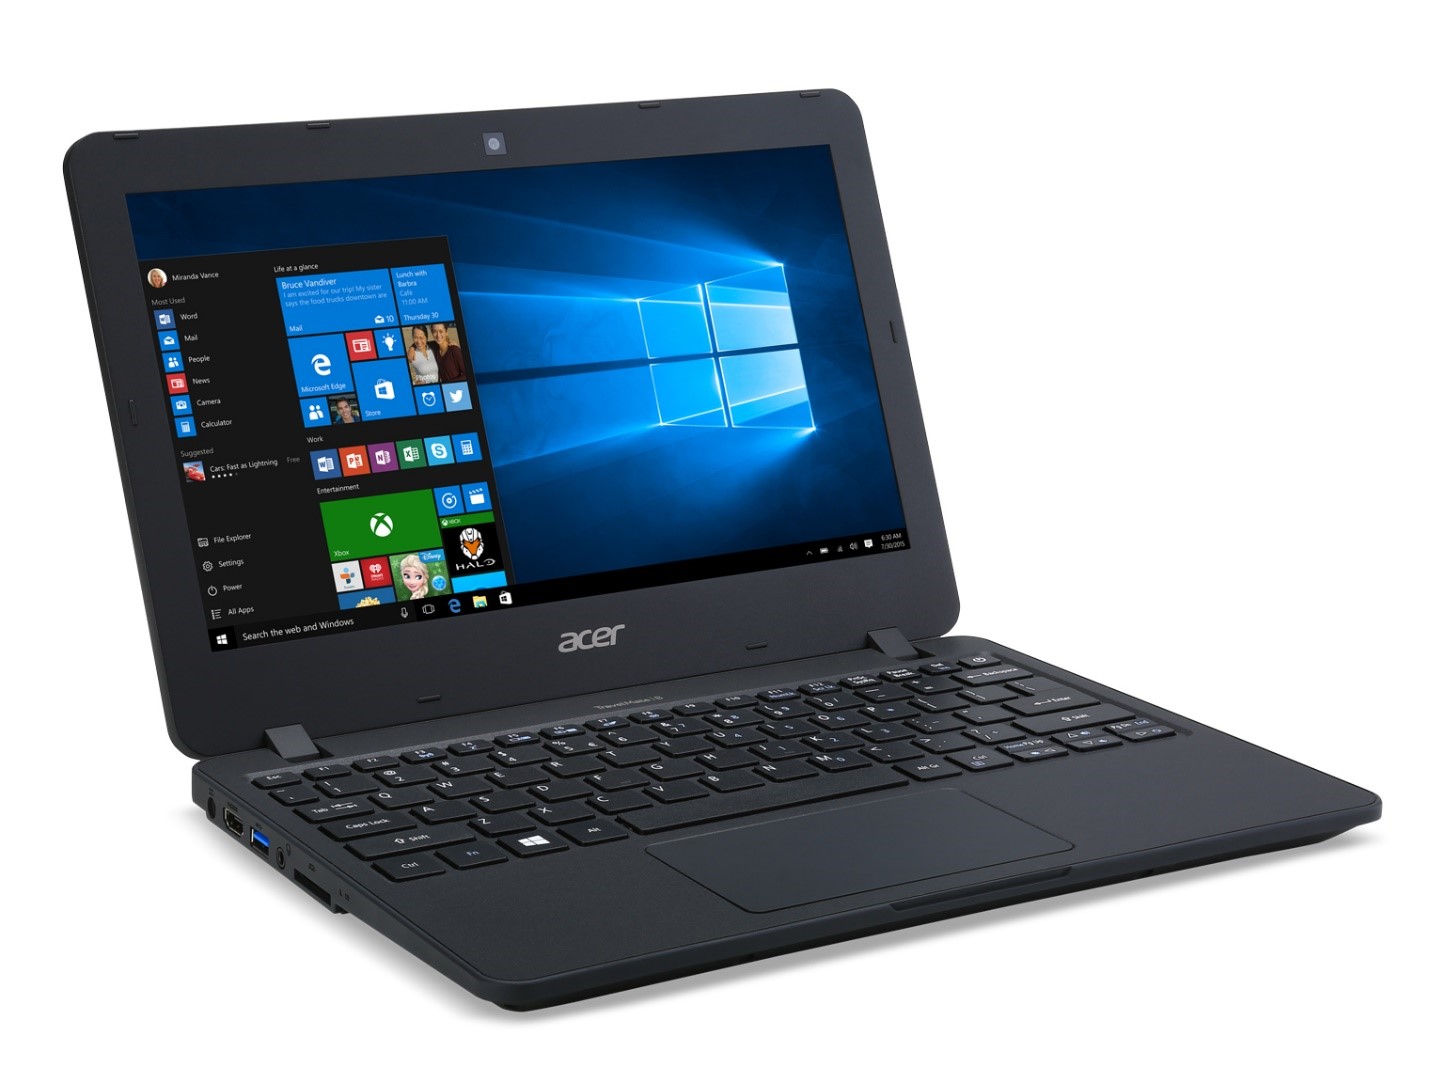 The Acer TravelMate B117 featuring Windows 10 Pro.